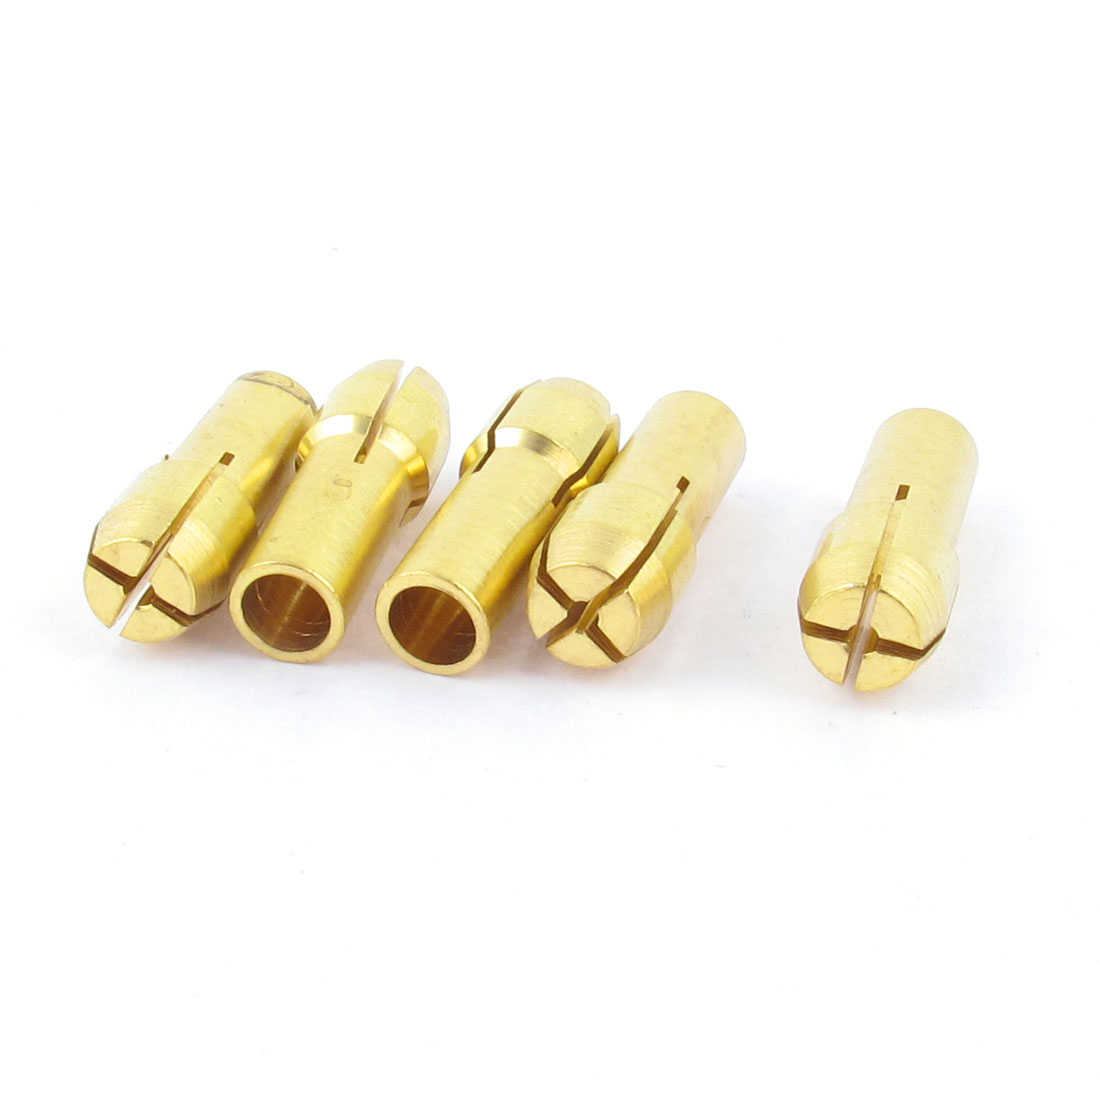 5 Pcs Gold Tone 1.2mm Clamping Dia 5mm Shank Dia Brass Collet Rotary Tool